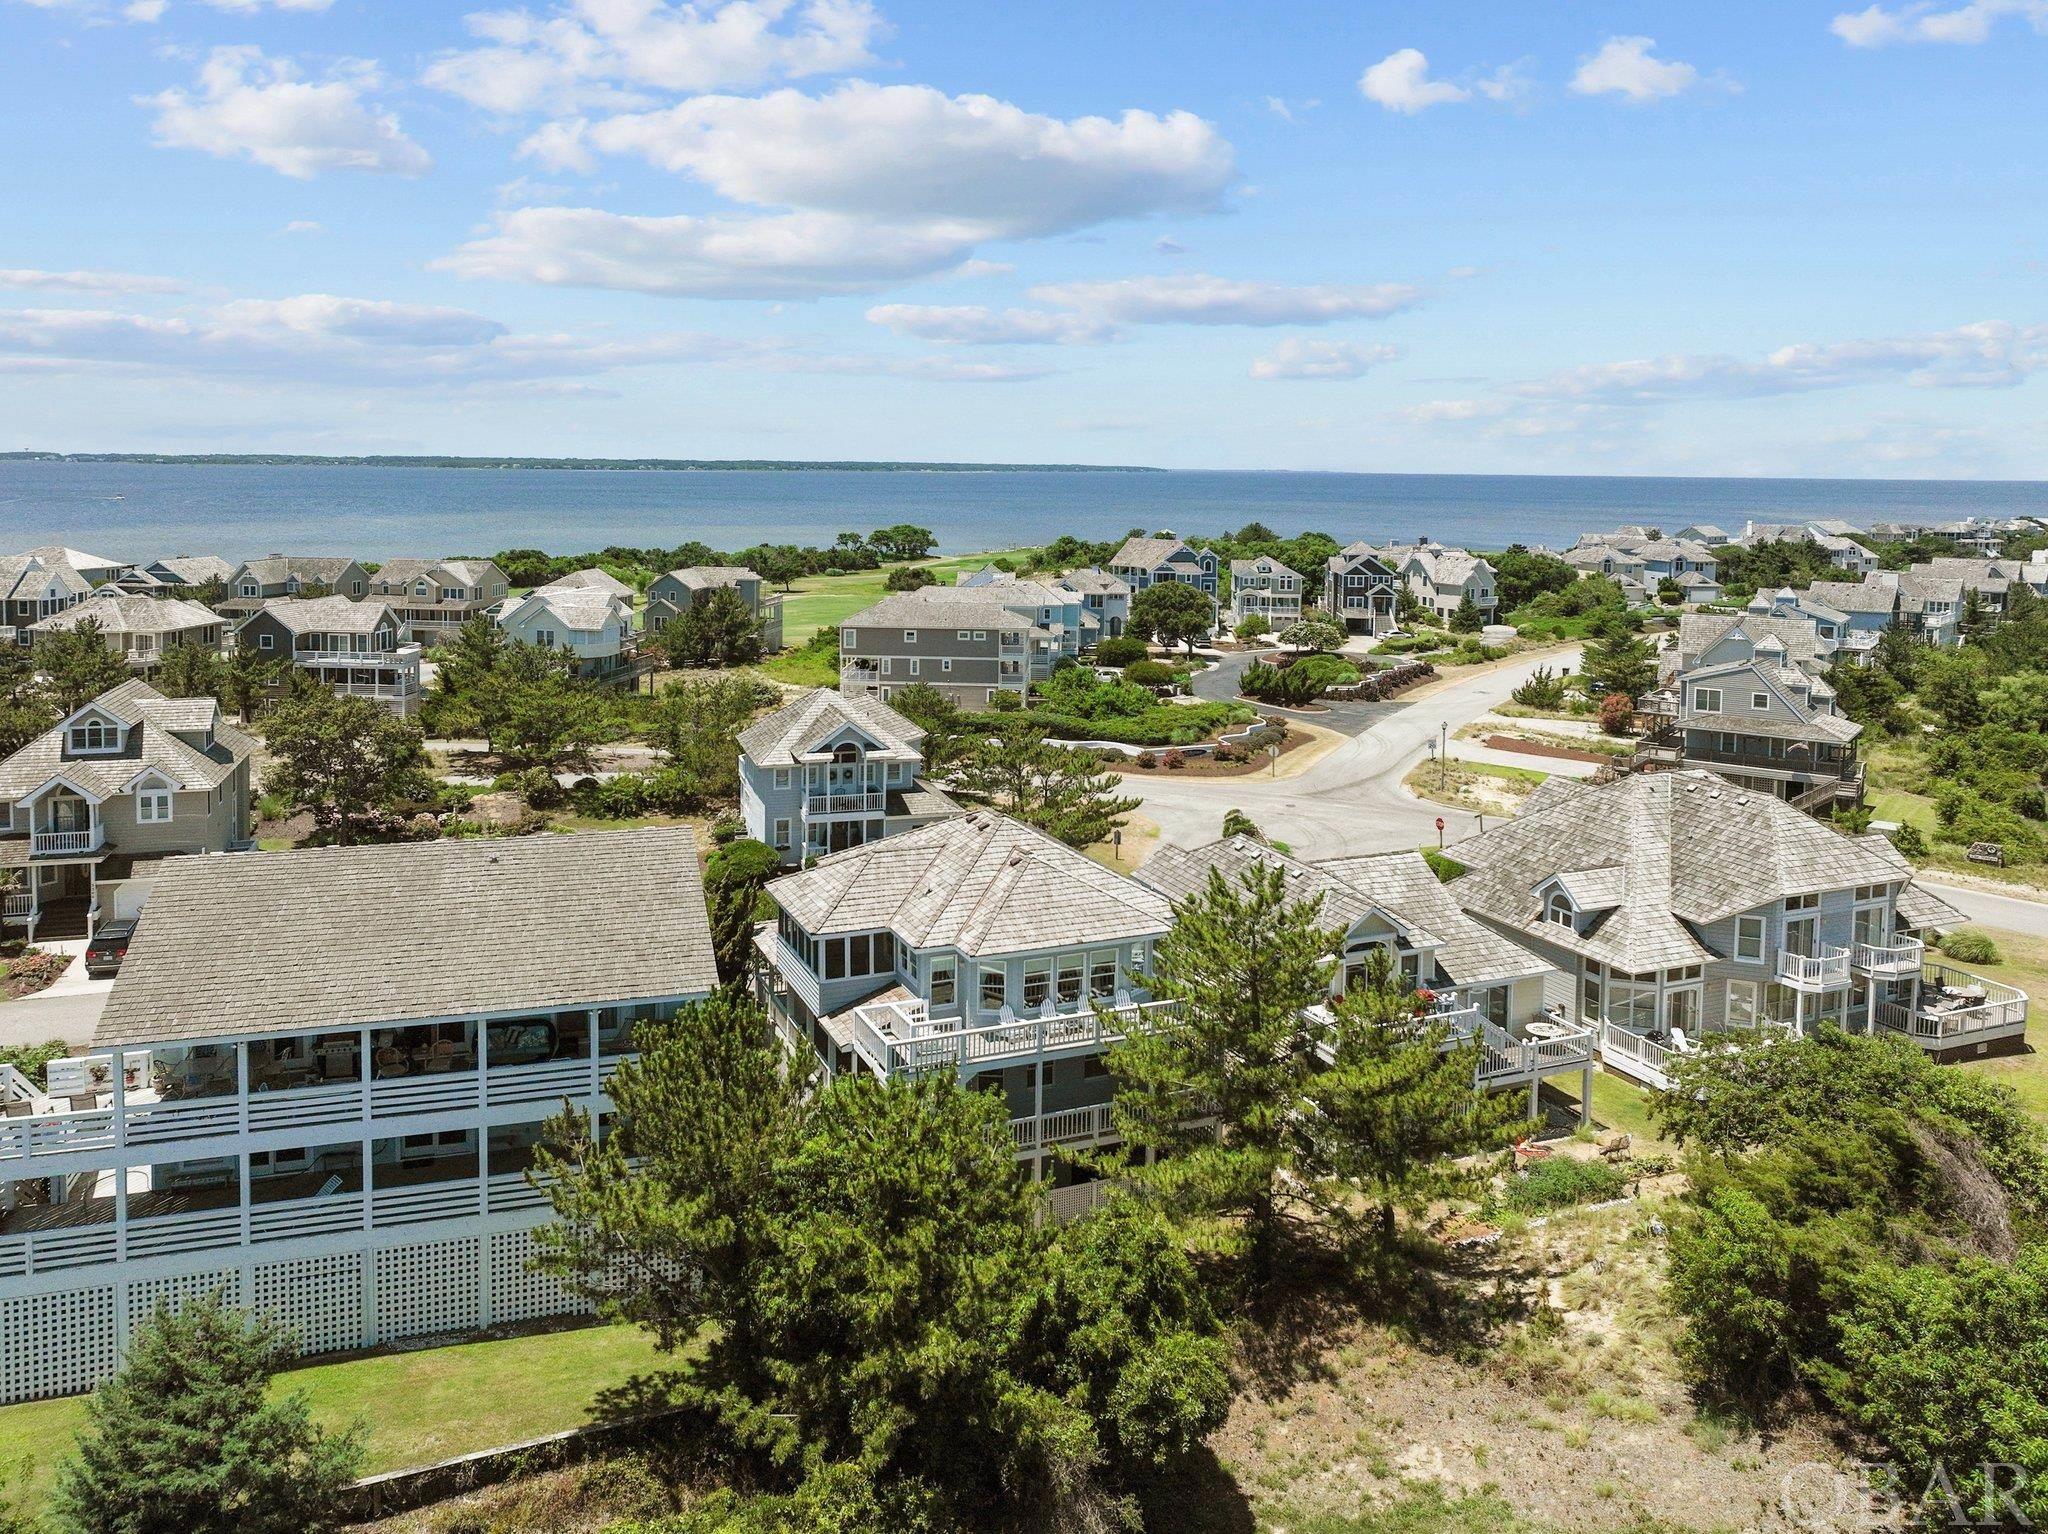 5305 Captains Way, Nags Head, NC 27959, 5 Bedrooms Bedrooms, ,3 BathroomsBathrooms,Residential,For sale,Captains Way,126120